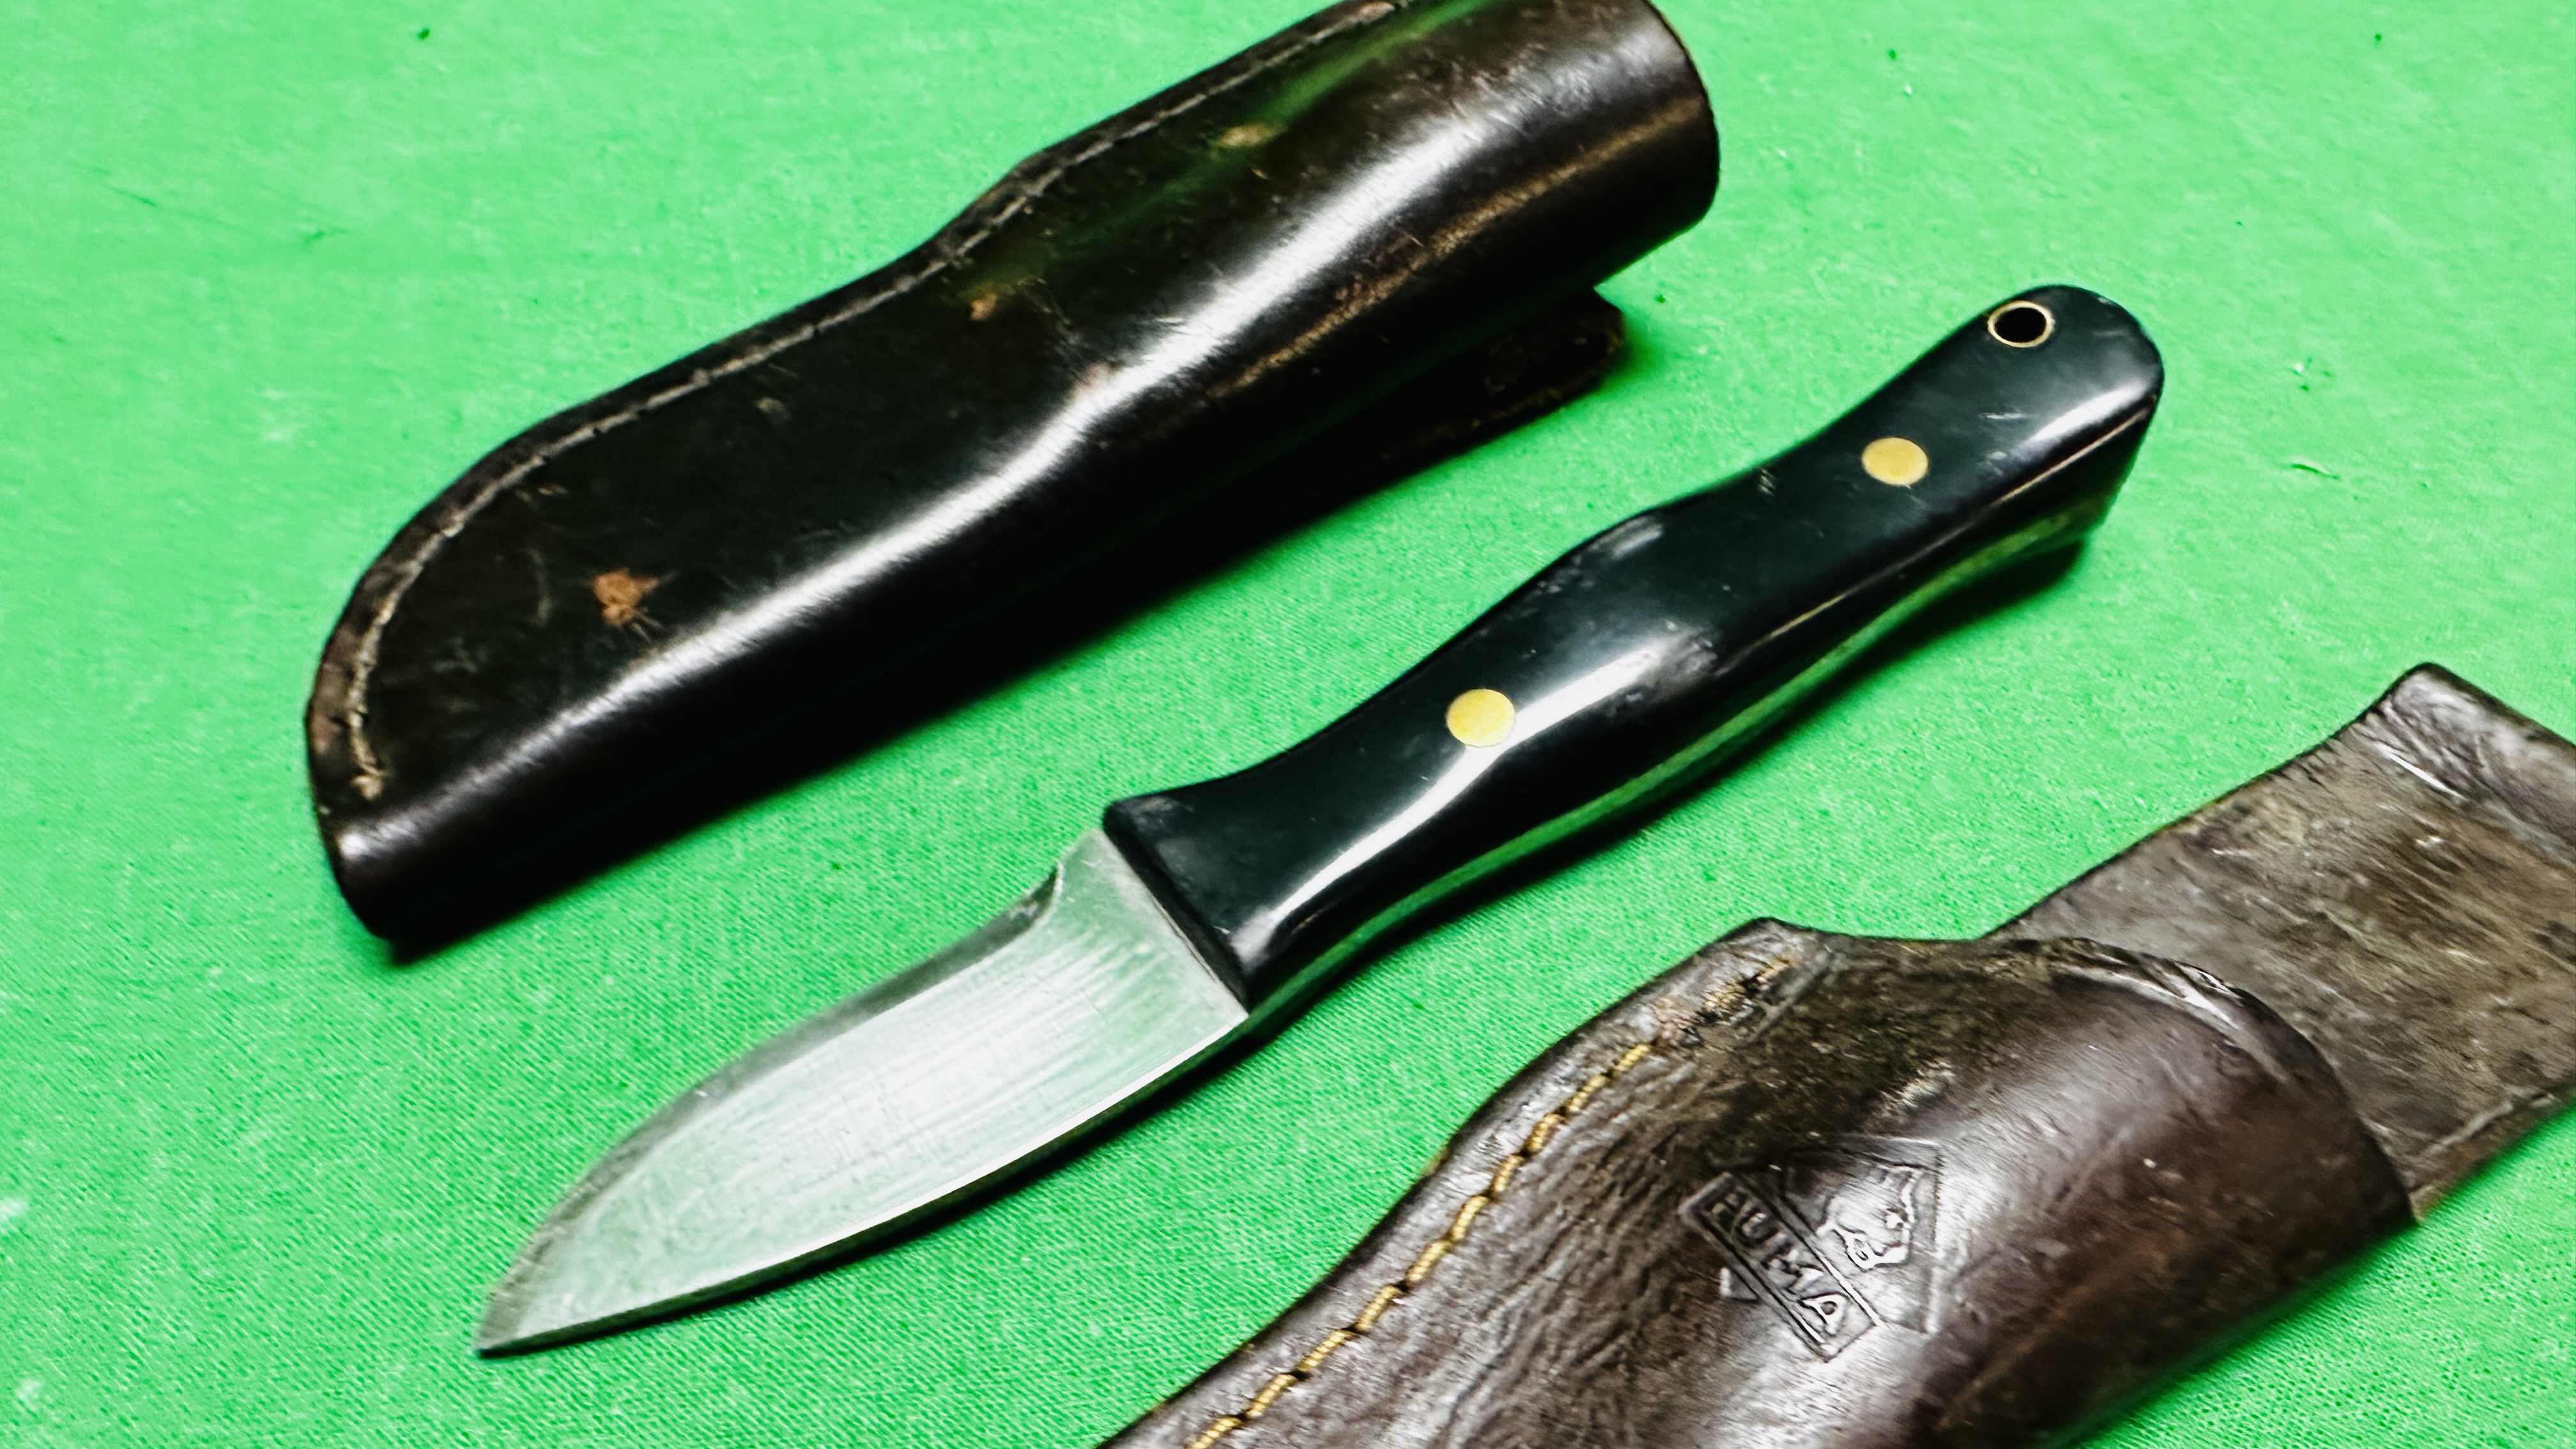 TWO VINTAGE HUNTERS KNIVES IN SHEATHS TO INCLUDE PUMA HUNTERS PAL AND BENIE GARLAND - NO POSTAGE OR - Image 6 of 8